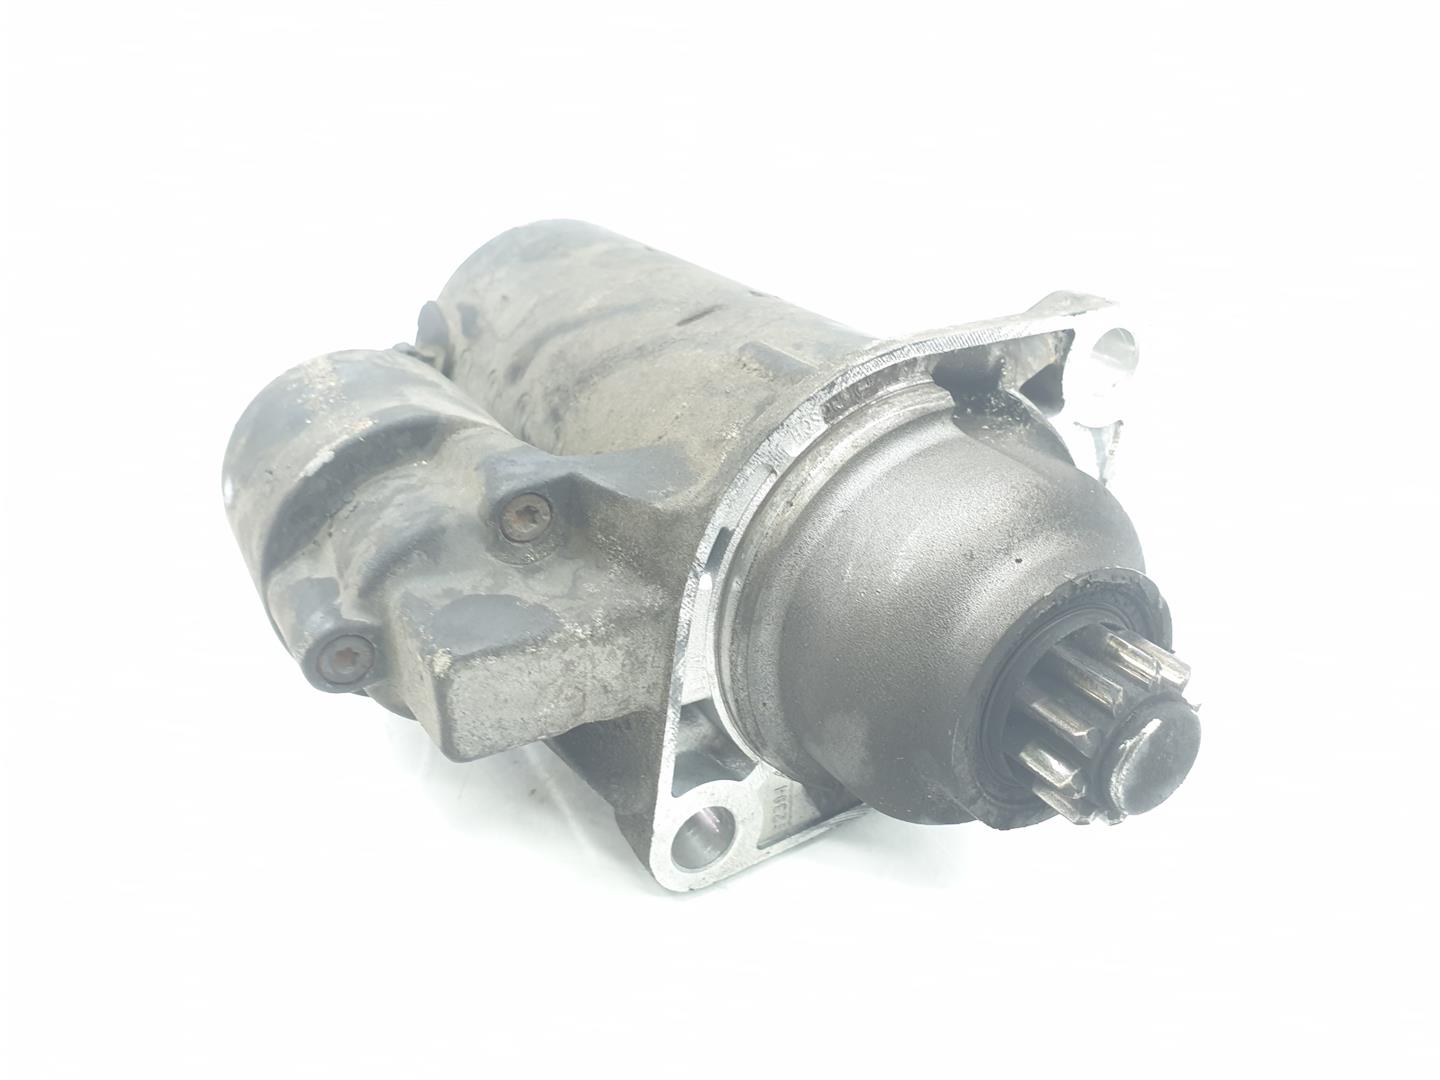 SEAT Toledo 2 generation (1999-2006) Startmotor 02A911023R, 02A911023R 25279510